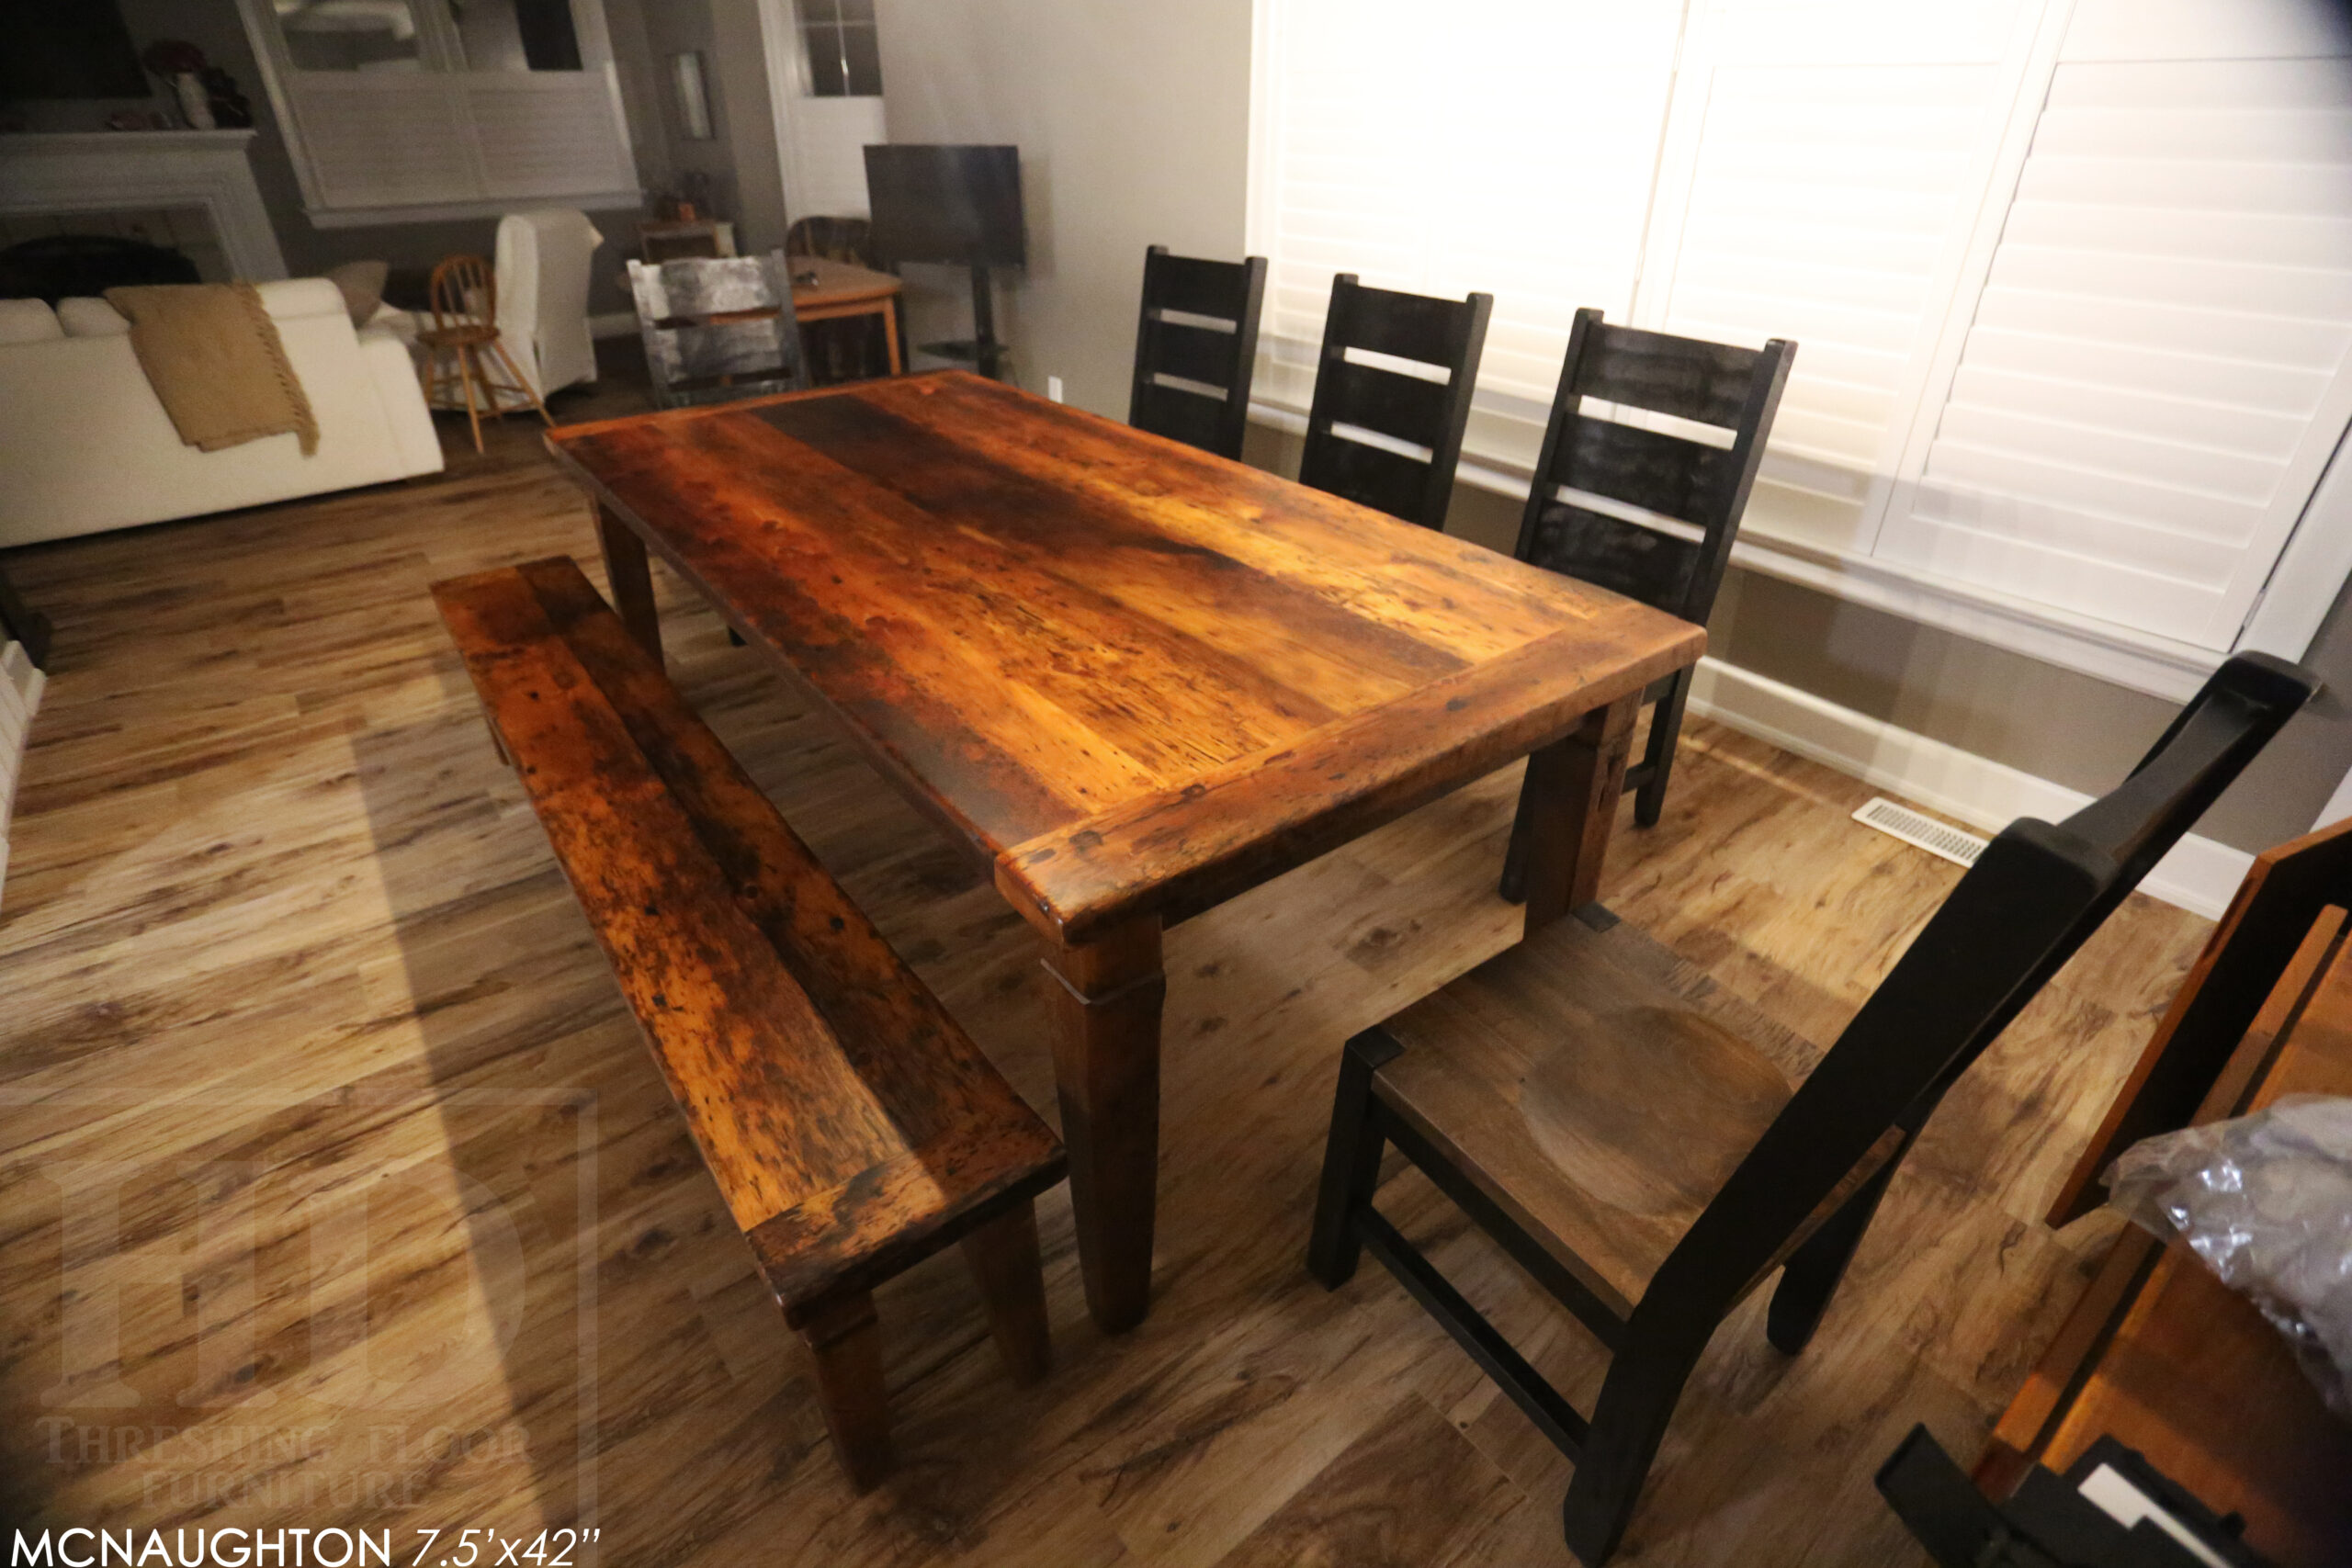 7.5’ Ontario Barnwood Table we made for a Sudbury, Ontario home – 42” wide – Harvest Base / Tapered with a Notch Windbrace Beam Legs - Reclaimed Hemlock Threshing Floor Construction – Original distressing & edges maintained – Premium epoxy + matte polyurethane finish – 7.5’ [matching] Harvest Bench – Cottager Chairs / Wormy Maple / Black Painted Frame / Seat Stained Colour of Table / Matte polyurethane clearcoat finish -  www.table.ca